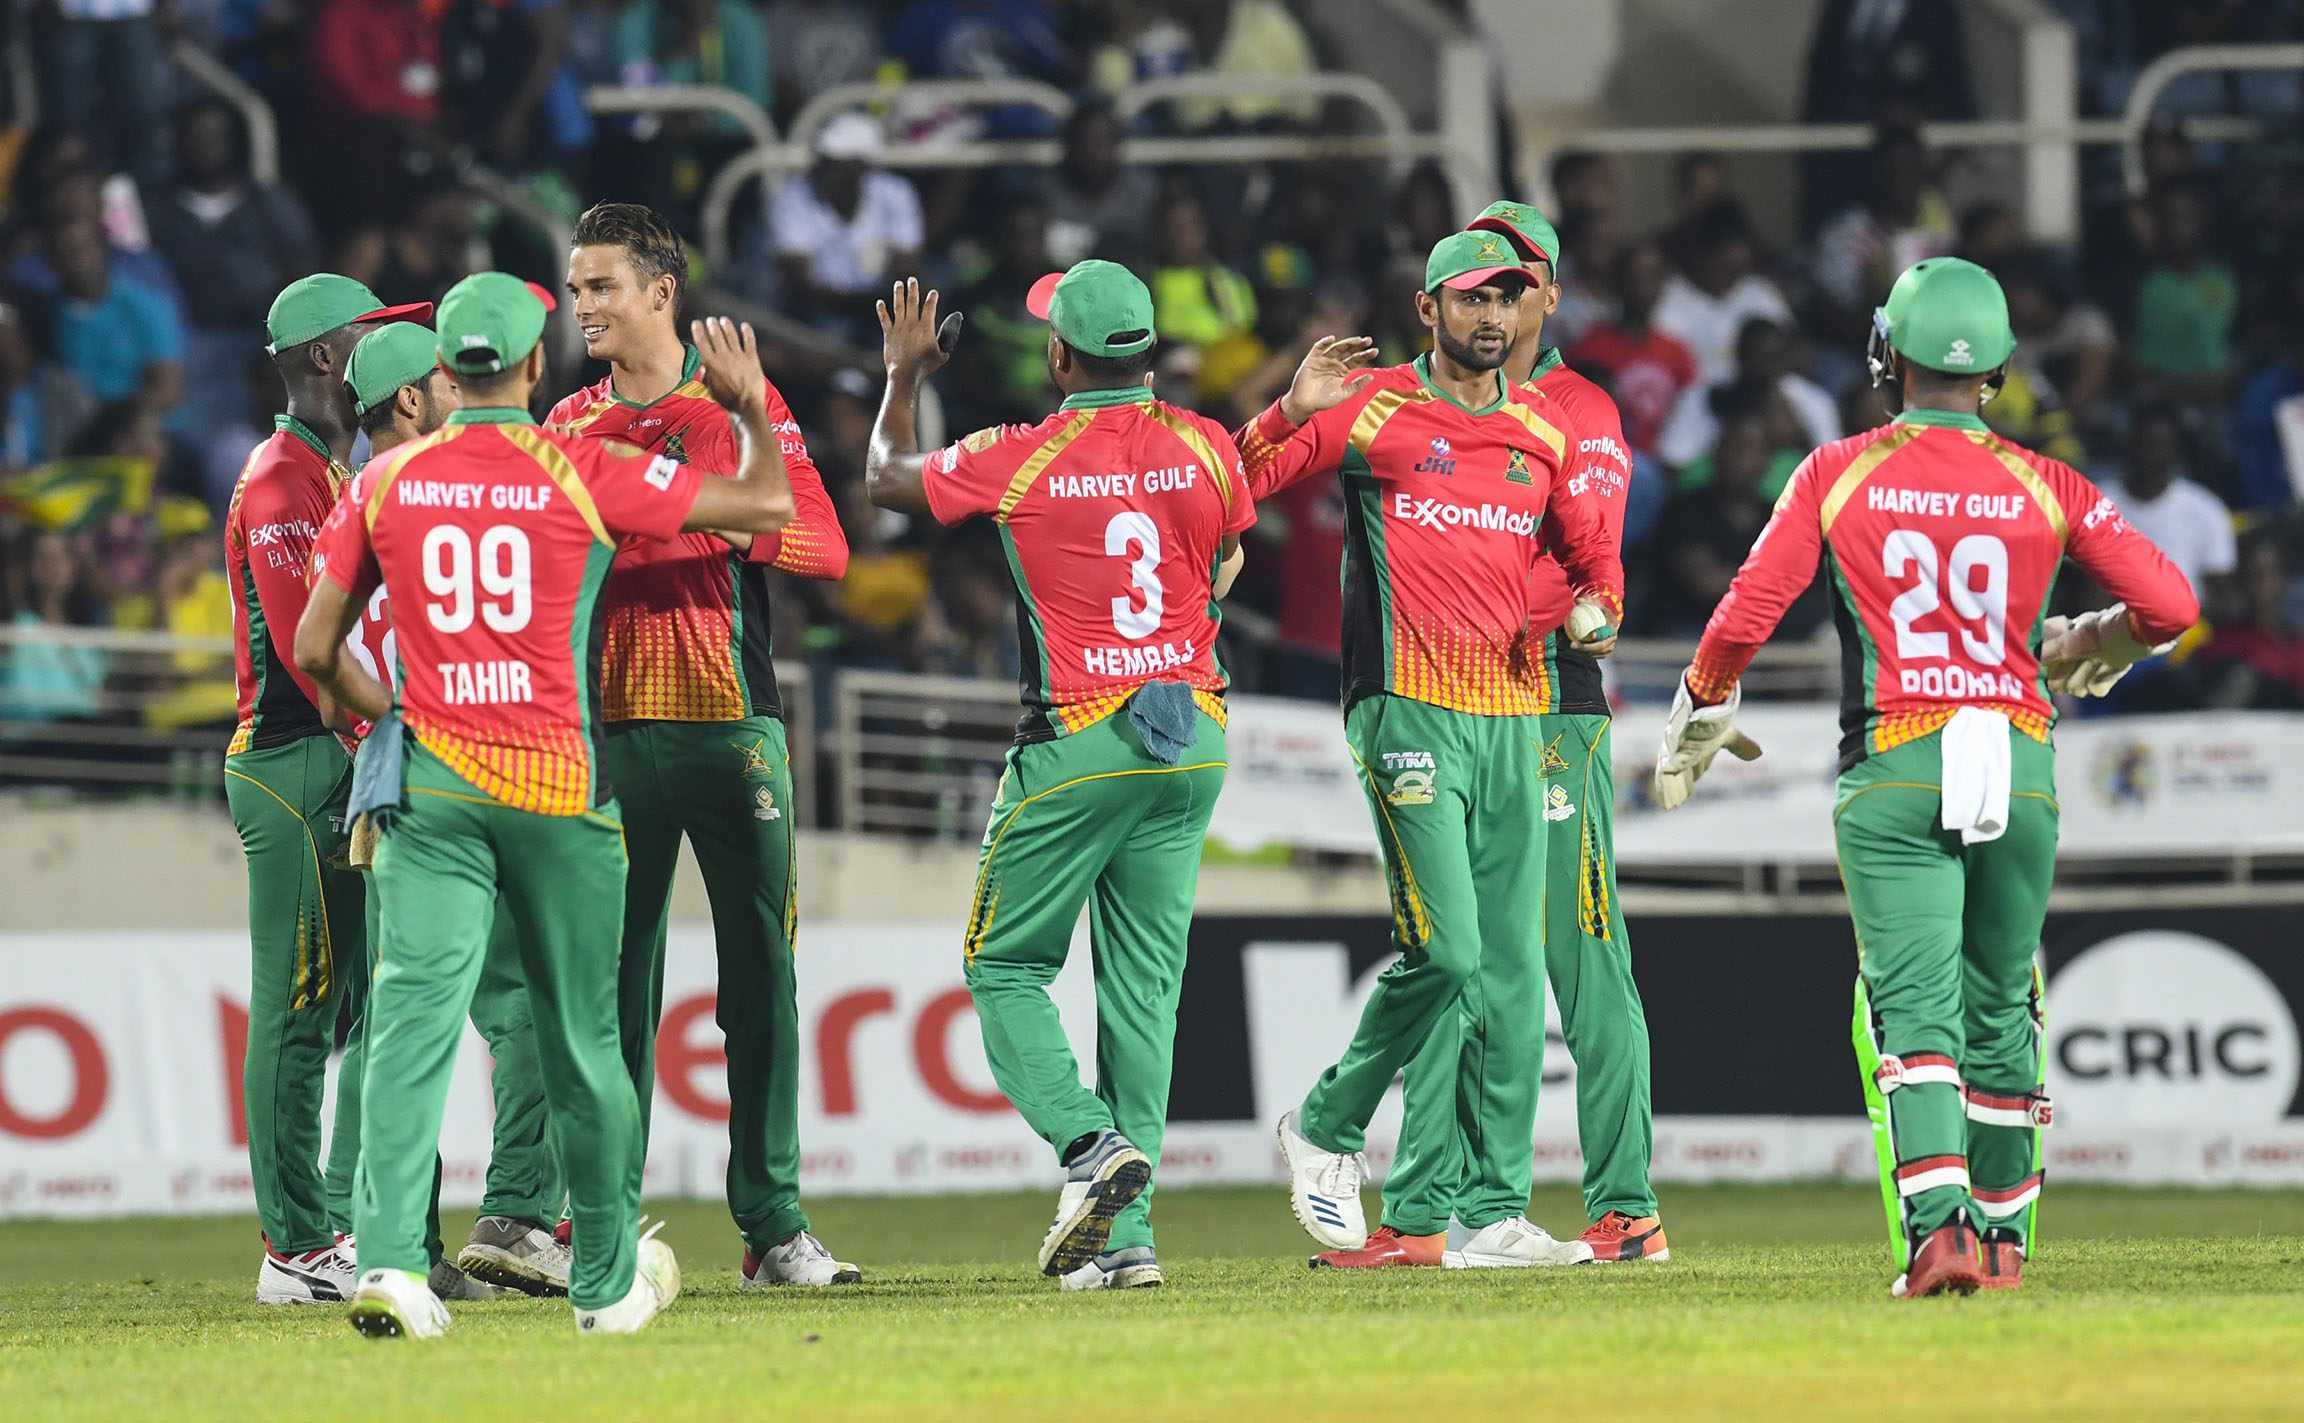 Guyana Amazon Warriors To Take On Jamaica Tallawahs For Spot In CPL Finals